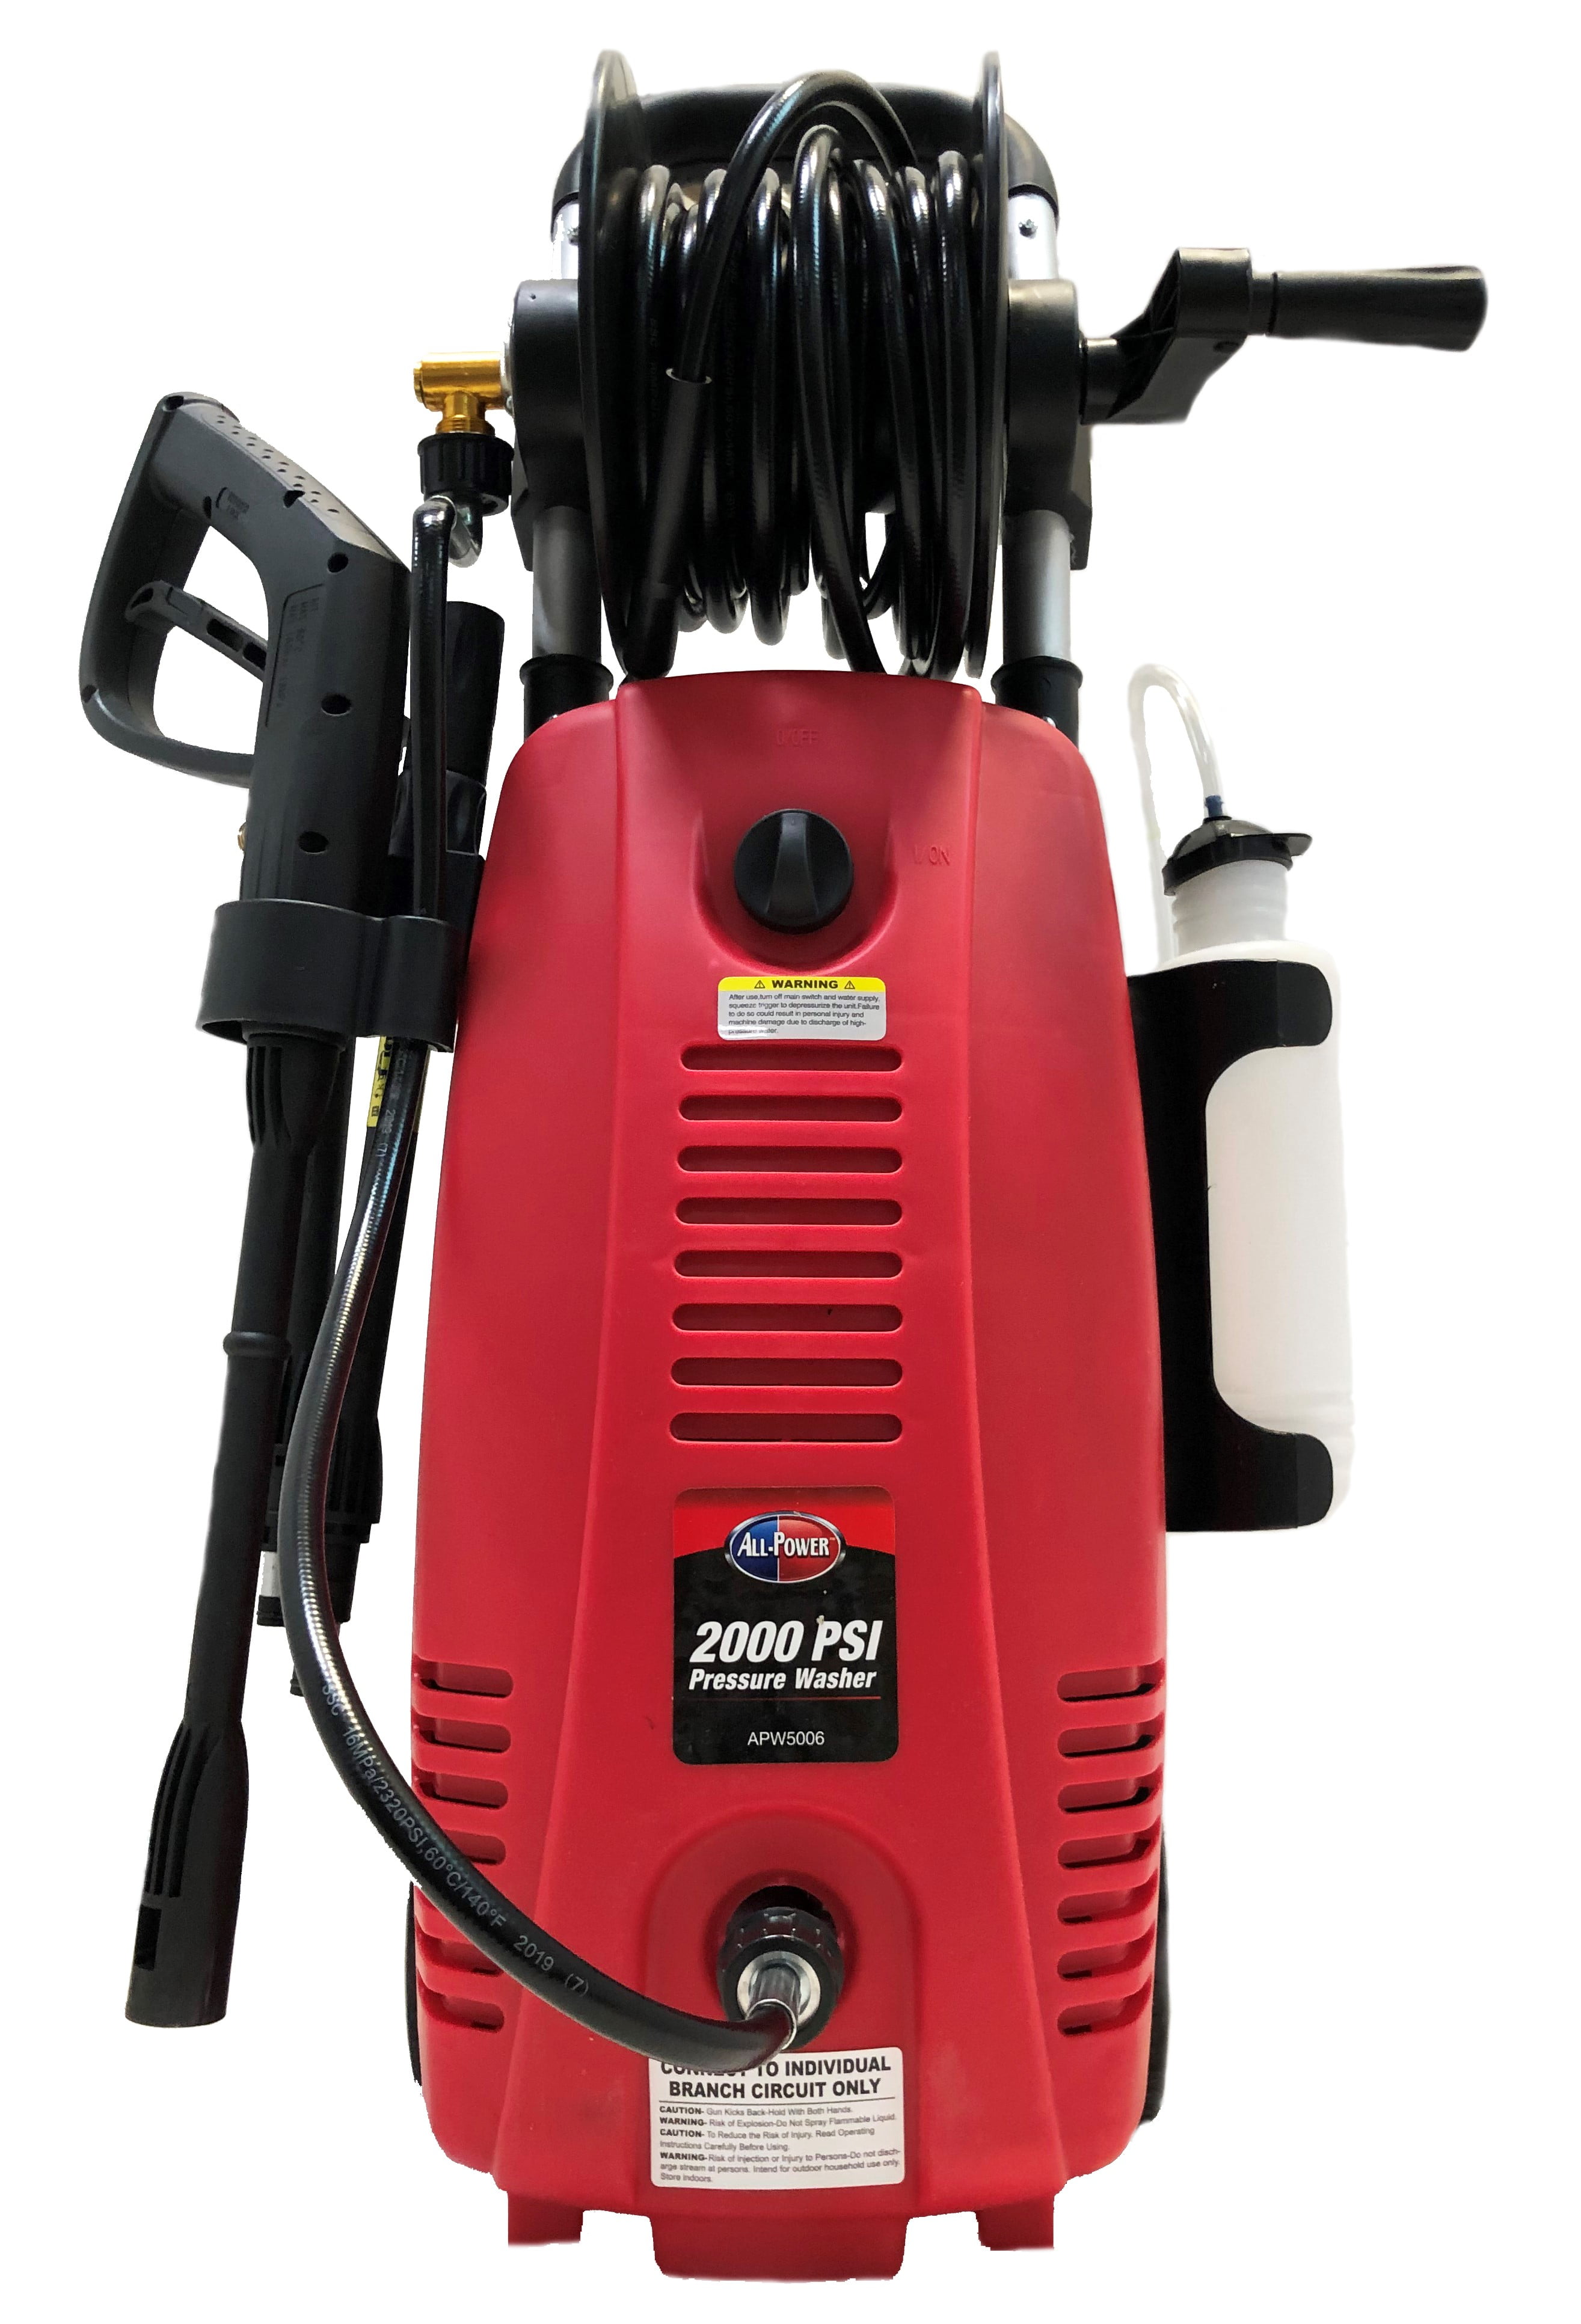 All Power 2000 PSI 1.6 GPM Electric Pressure Washer With Hose Reel for  Buildings, Walkway, Vehicles and Outdoor Cleaning, Red, APW5006R